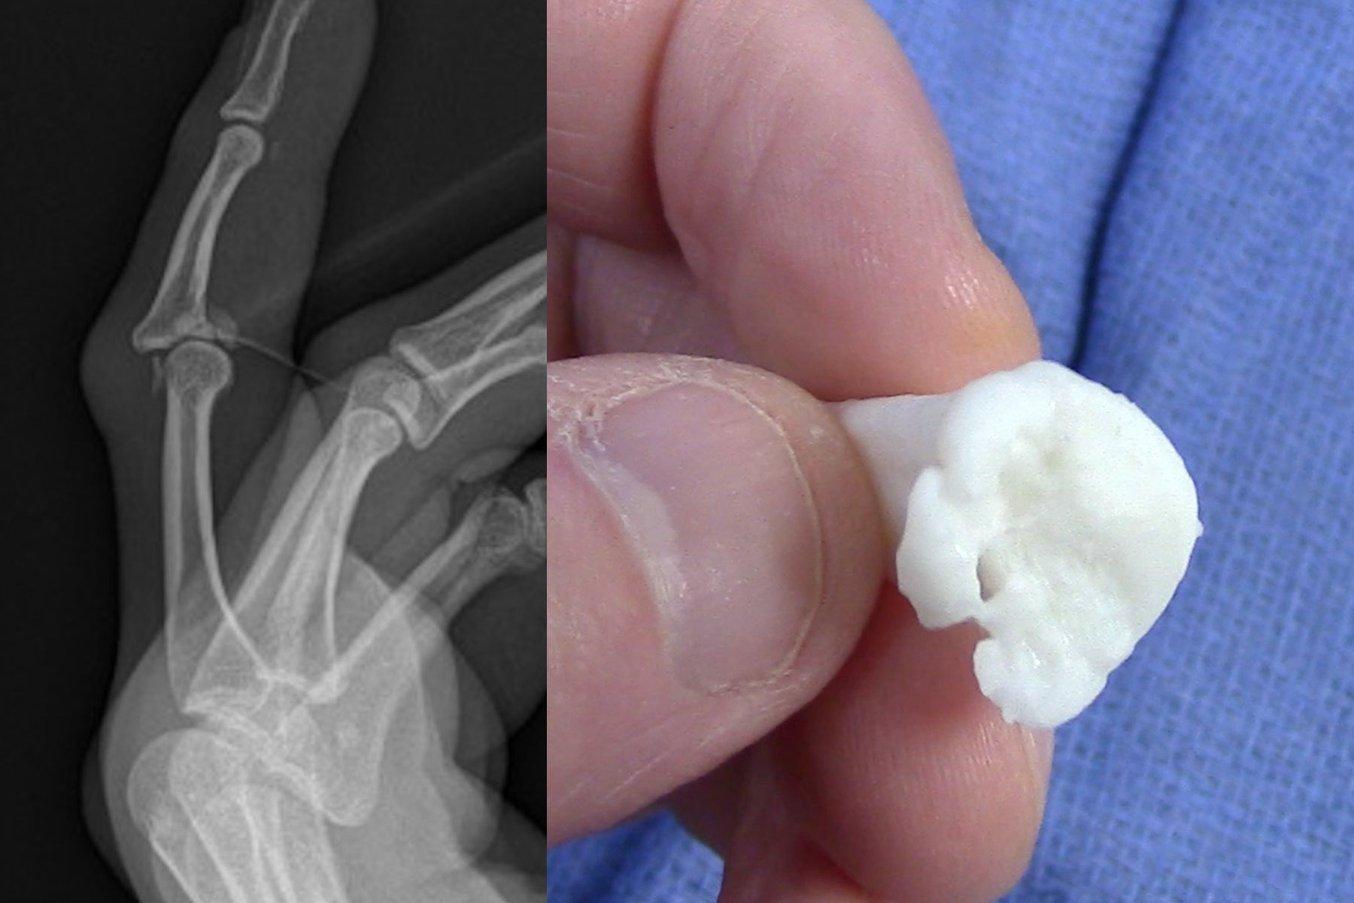 X-ray and the 3D printed anatomical model of a complex finger fracture.